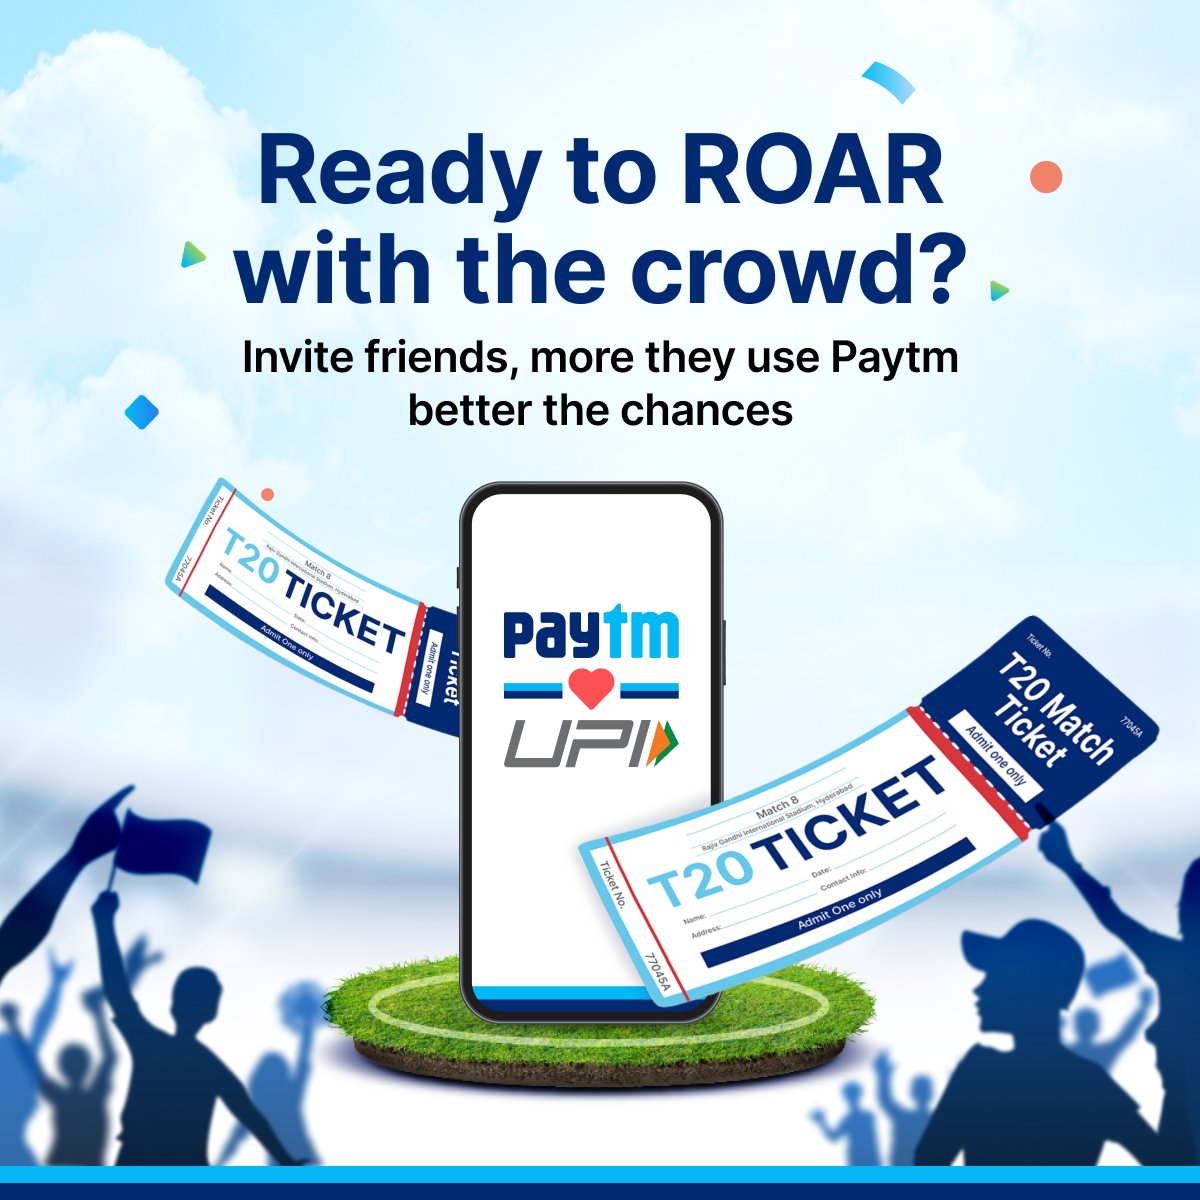 Don't miss out on the #T20 LIVE showdown: Rajasthan Vs Delhi 🏏 Bring your squad to Paytm for a chance to win 2 tickets. The more friends you invite and the more they use Paytm, the higher your chances. Refer now: m.paytm.me/T20Ticket #PaytmKaro